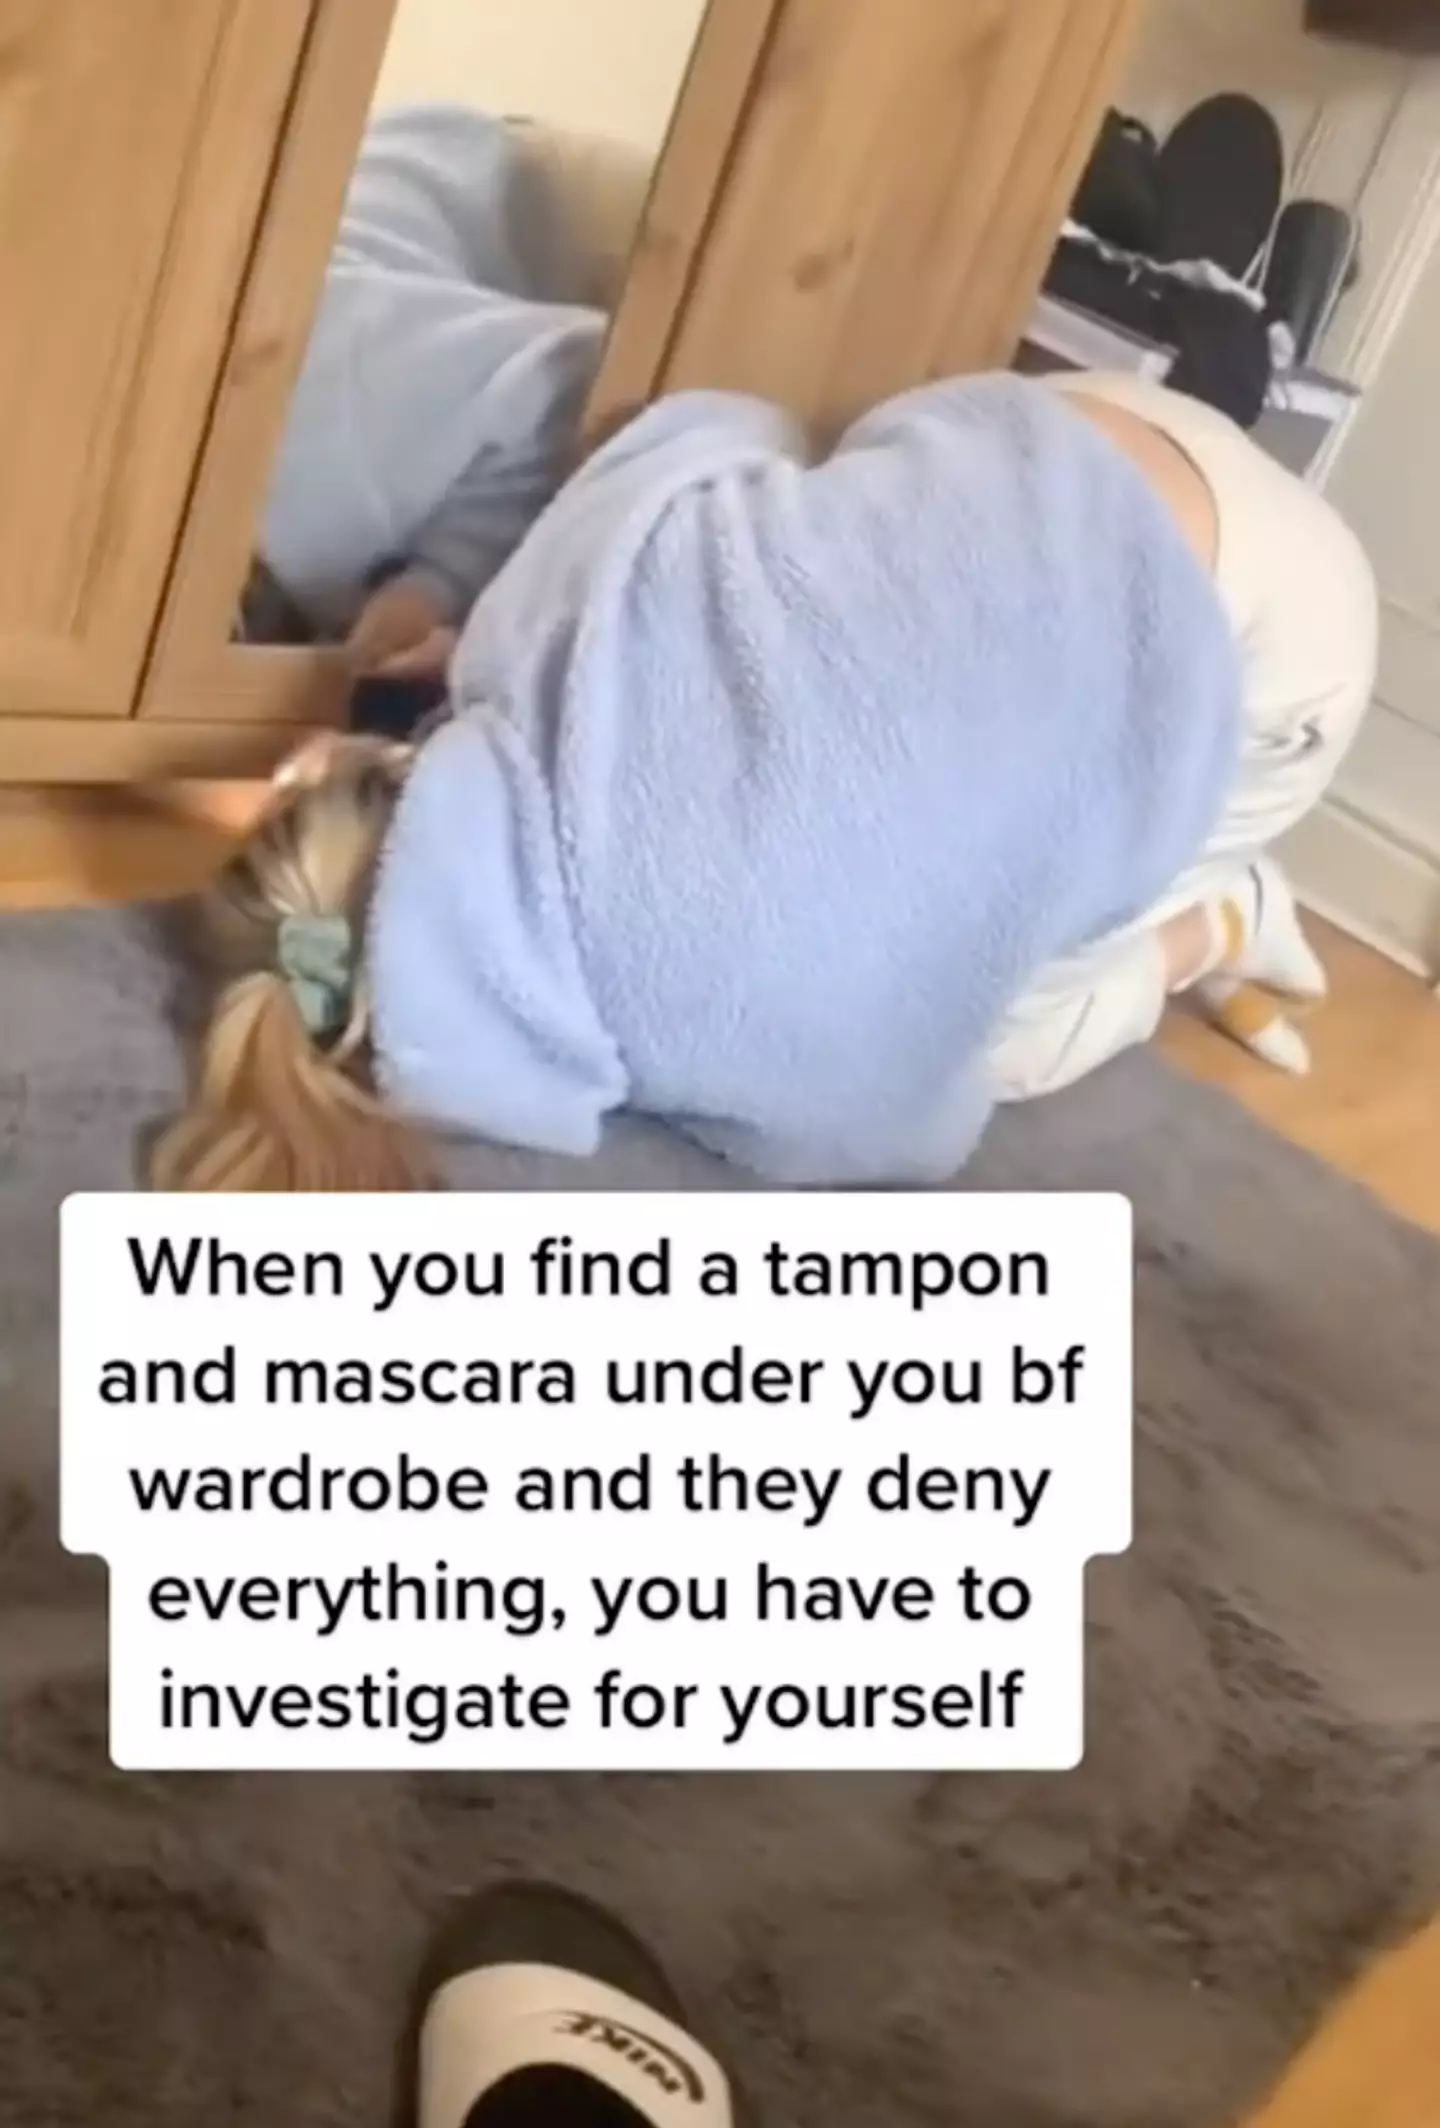 The woman found the tampon under the wardrobe (